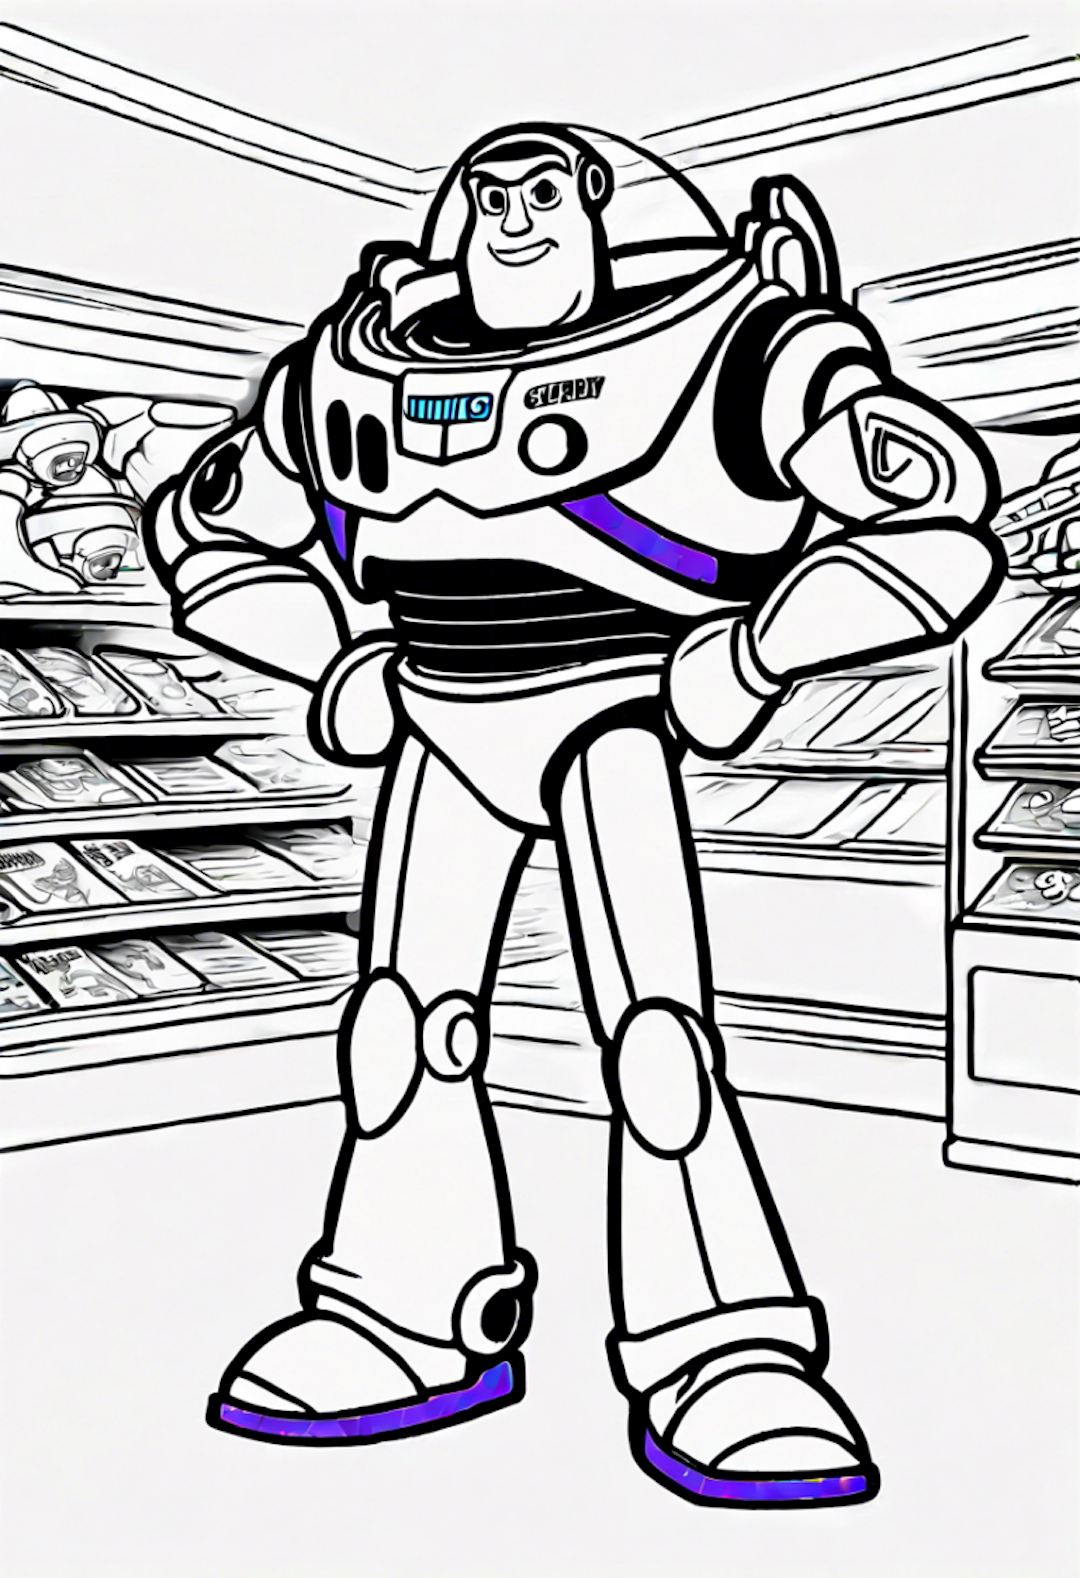 Buzz Lightyear In A Toy Store coloring pages